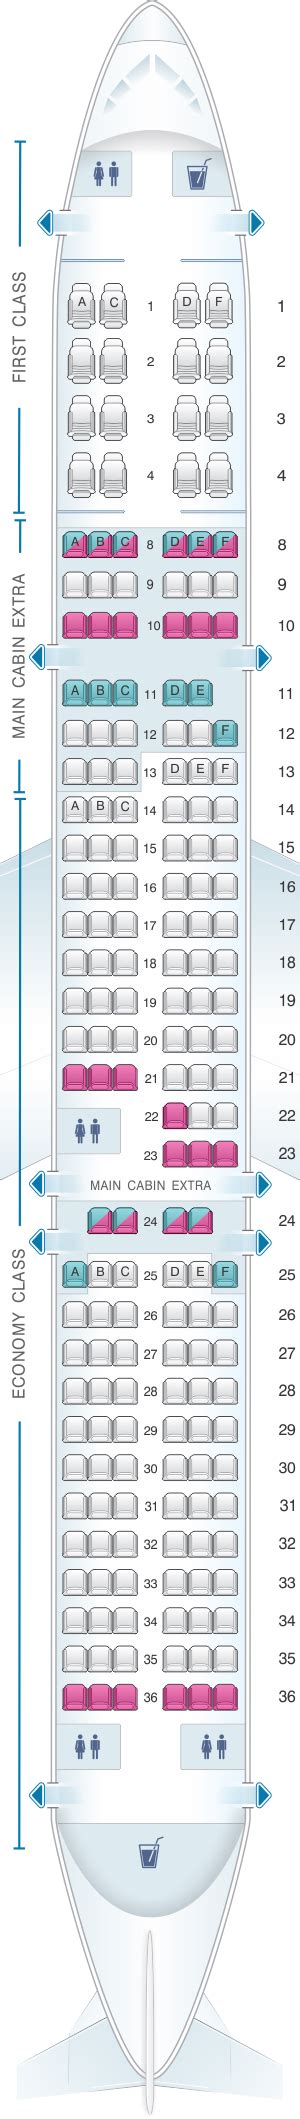 A321 seat map american. Economy. Standard seat. 31. 16.3 -17.7. 13-36. 129. there are no reviews yet. Find the best seat wiht our American Airlines Airbus A321 v1 seating chart. Use this seat map to get the most comfortable seats, legroom and recline before booking. 